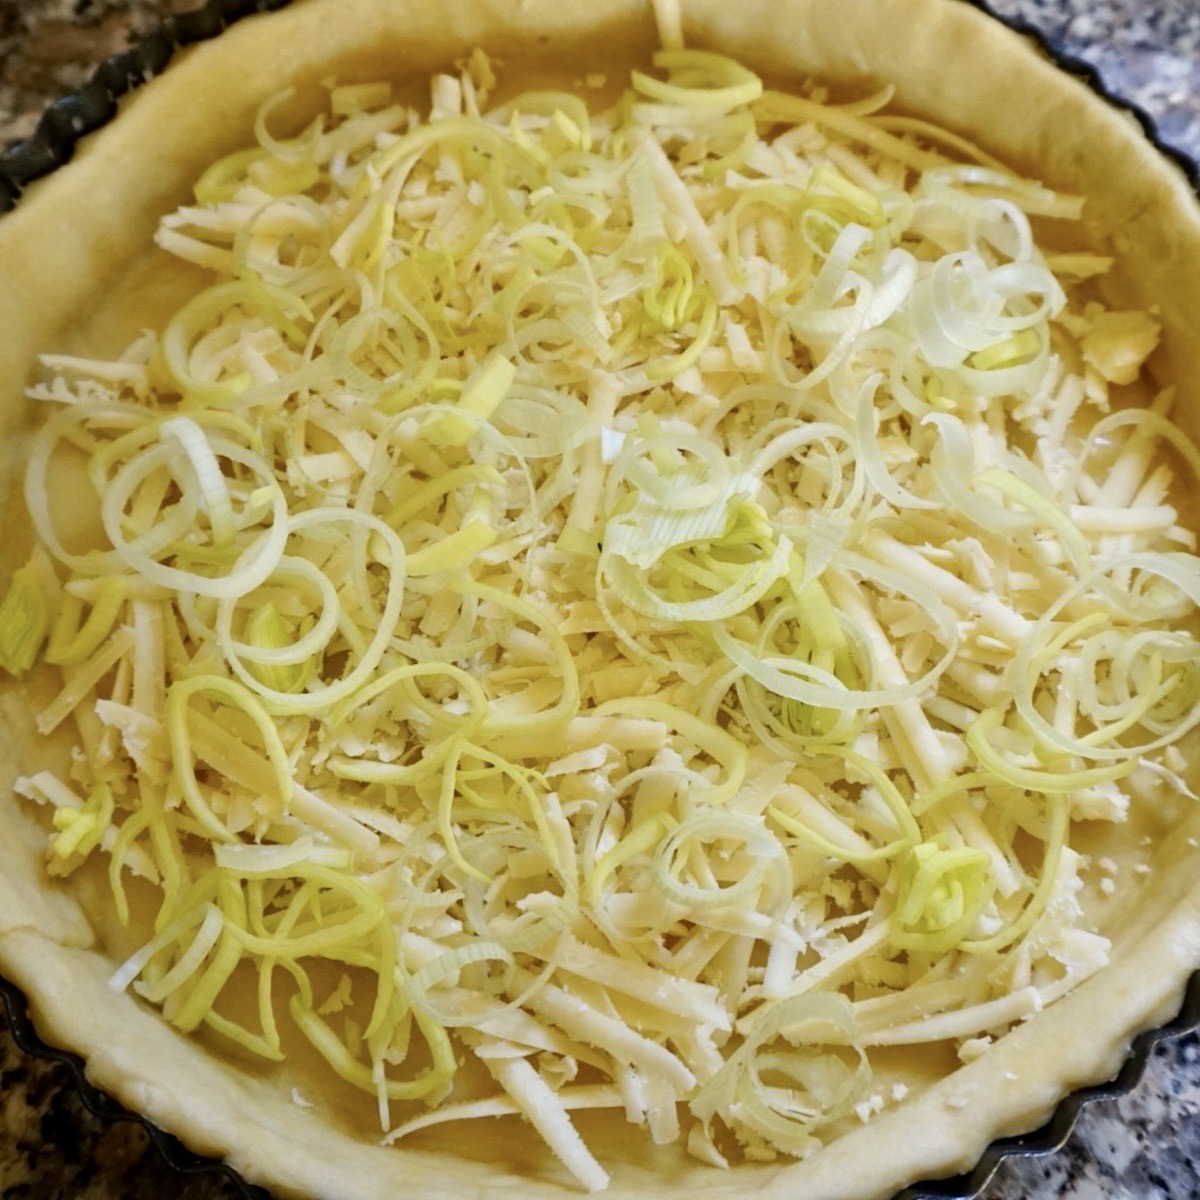 A pastry case with grated cheese and sliced leeks.